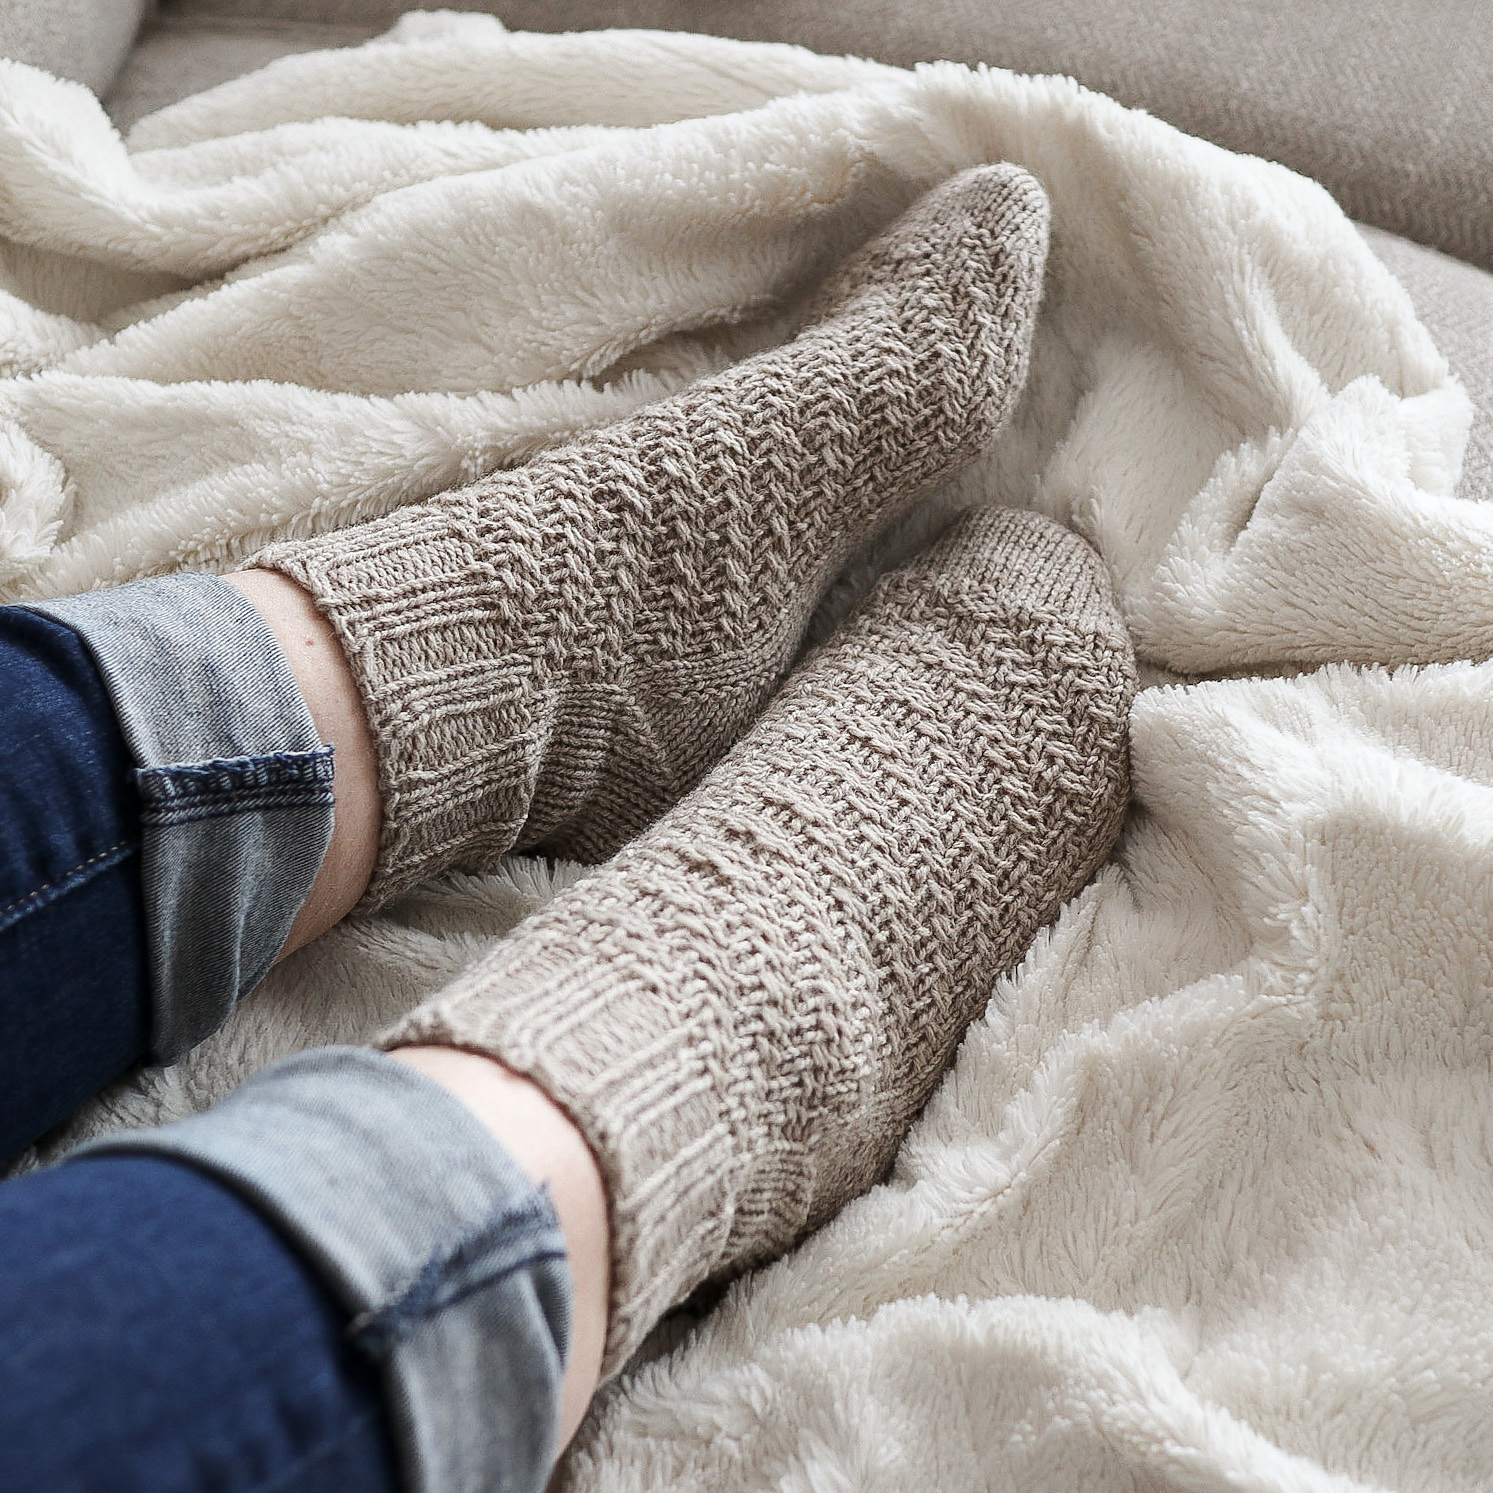 Cream colored knit socks in a wavy textural pattern worn by an unseen person rest on a white fleece blanket